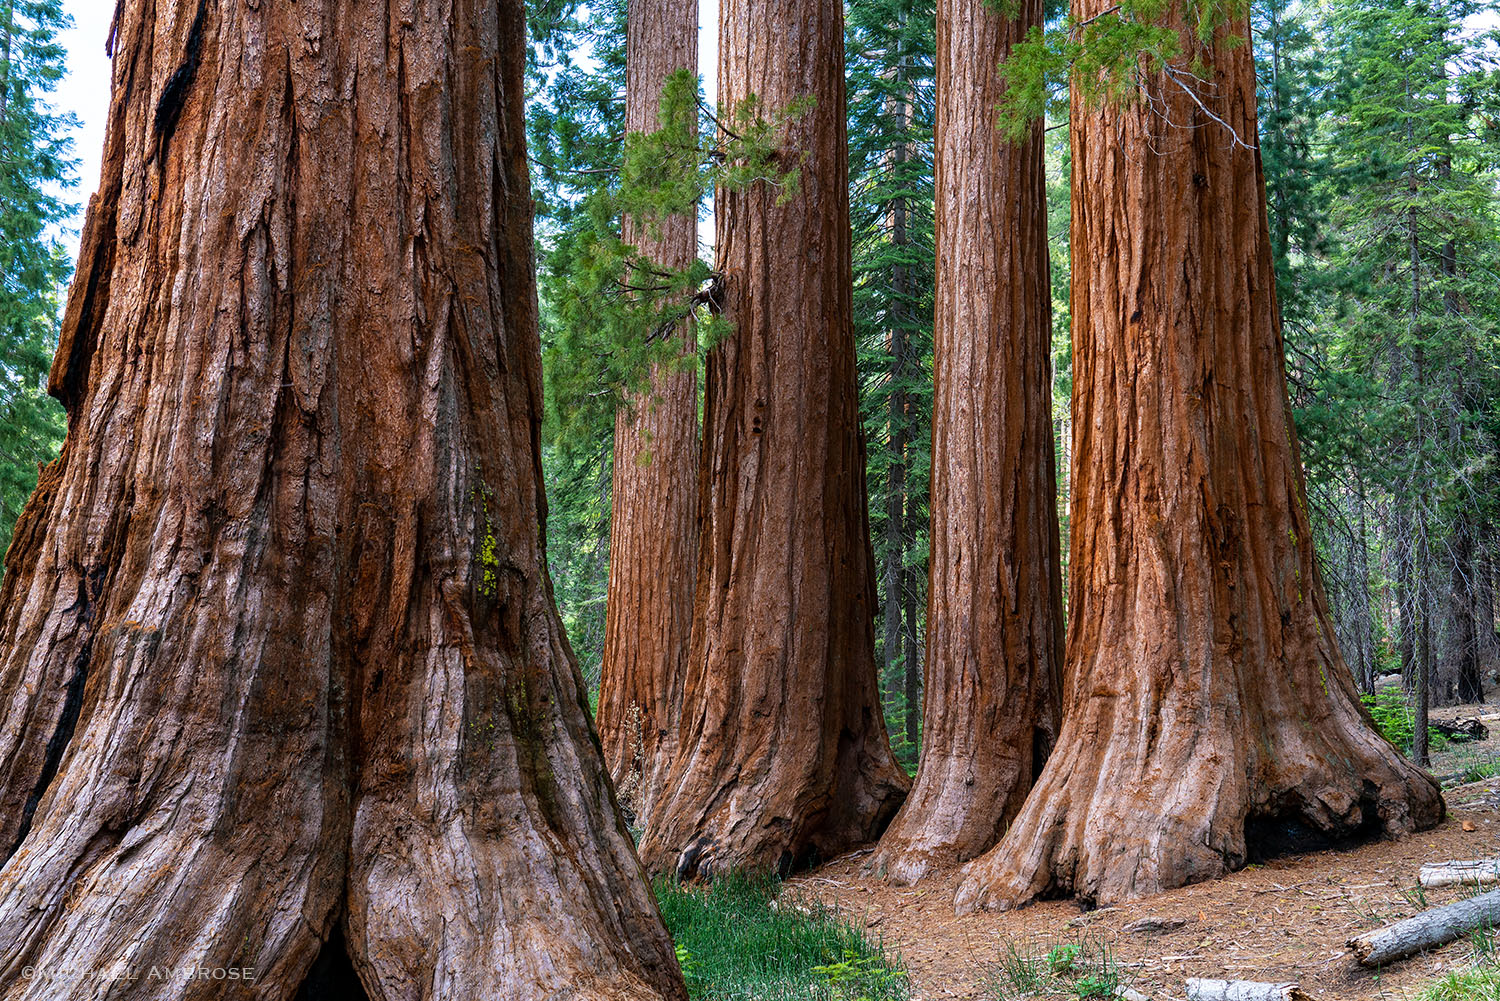 In Mariposa Grove of Sequoias, the Bachelor and three Graces are an easy walk on the Yosemite National Park Trail.